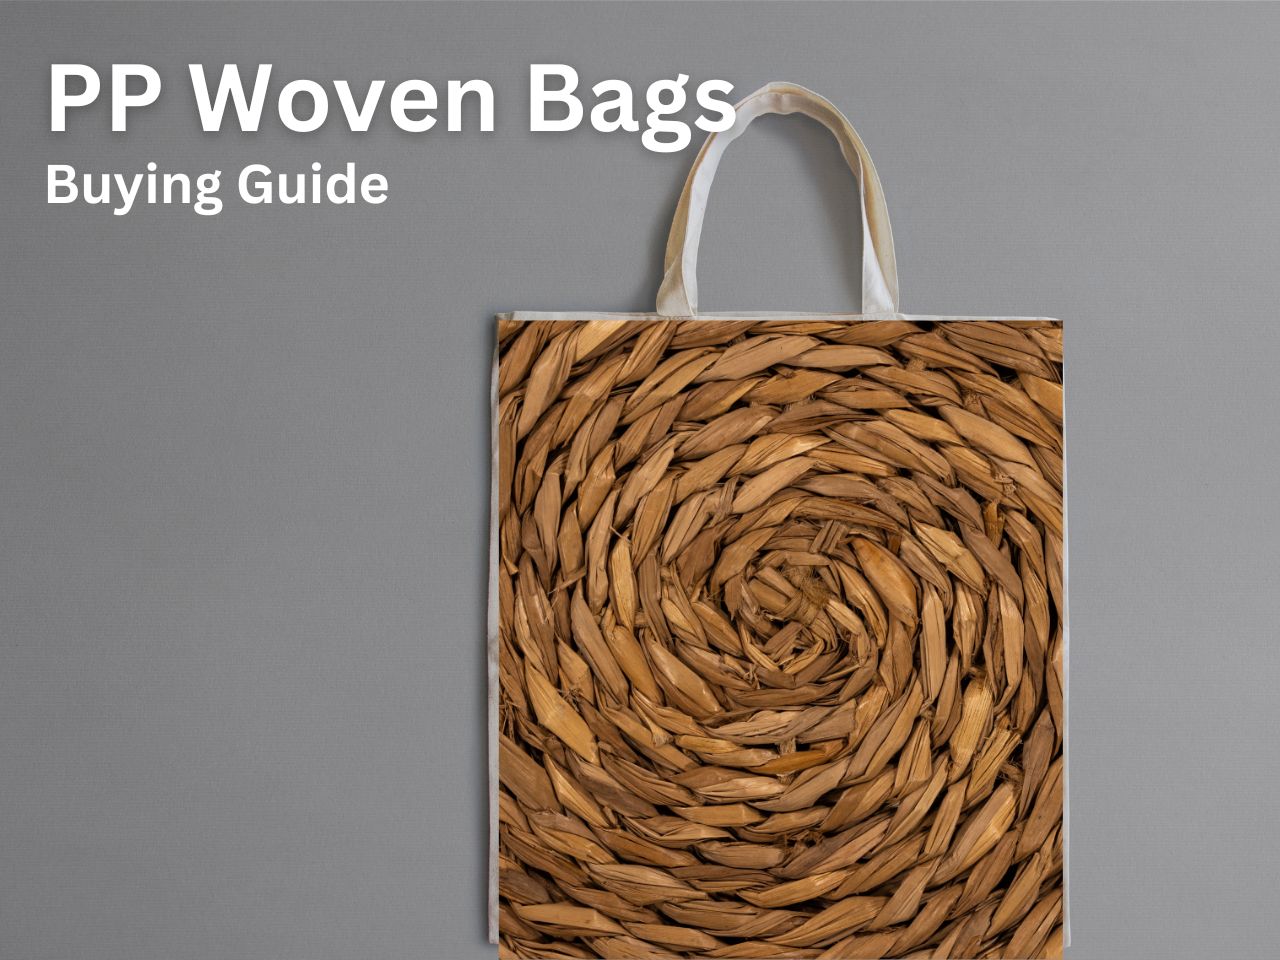 PP Woven Bags buying guide